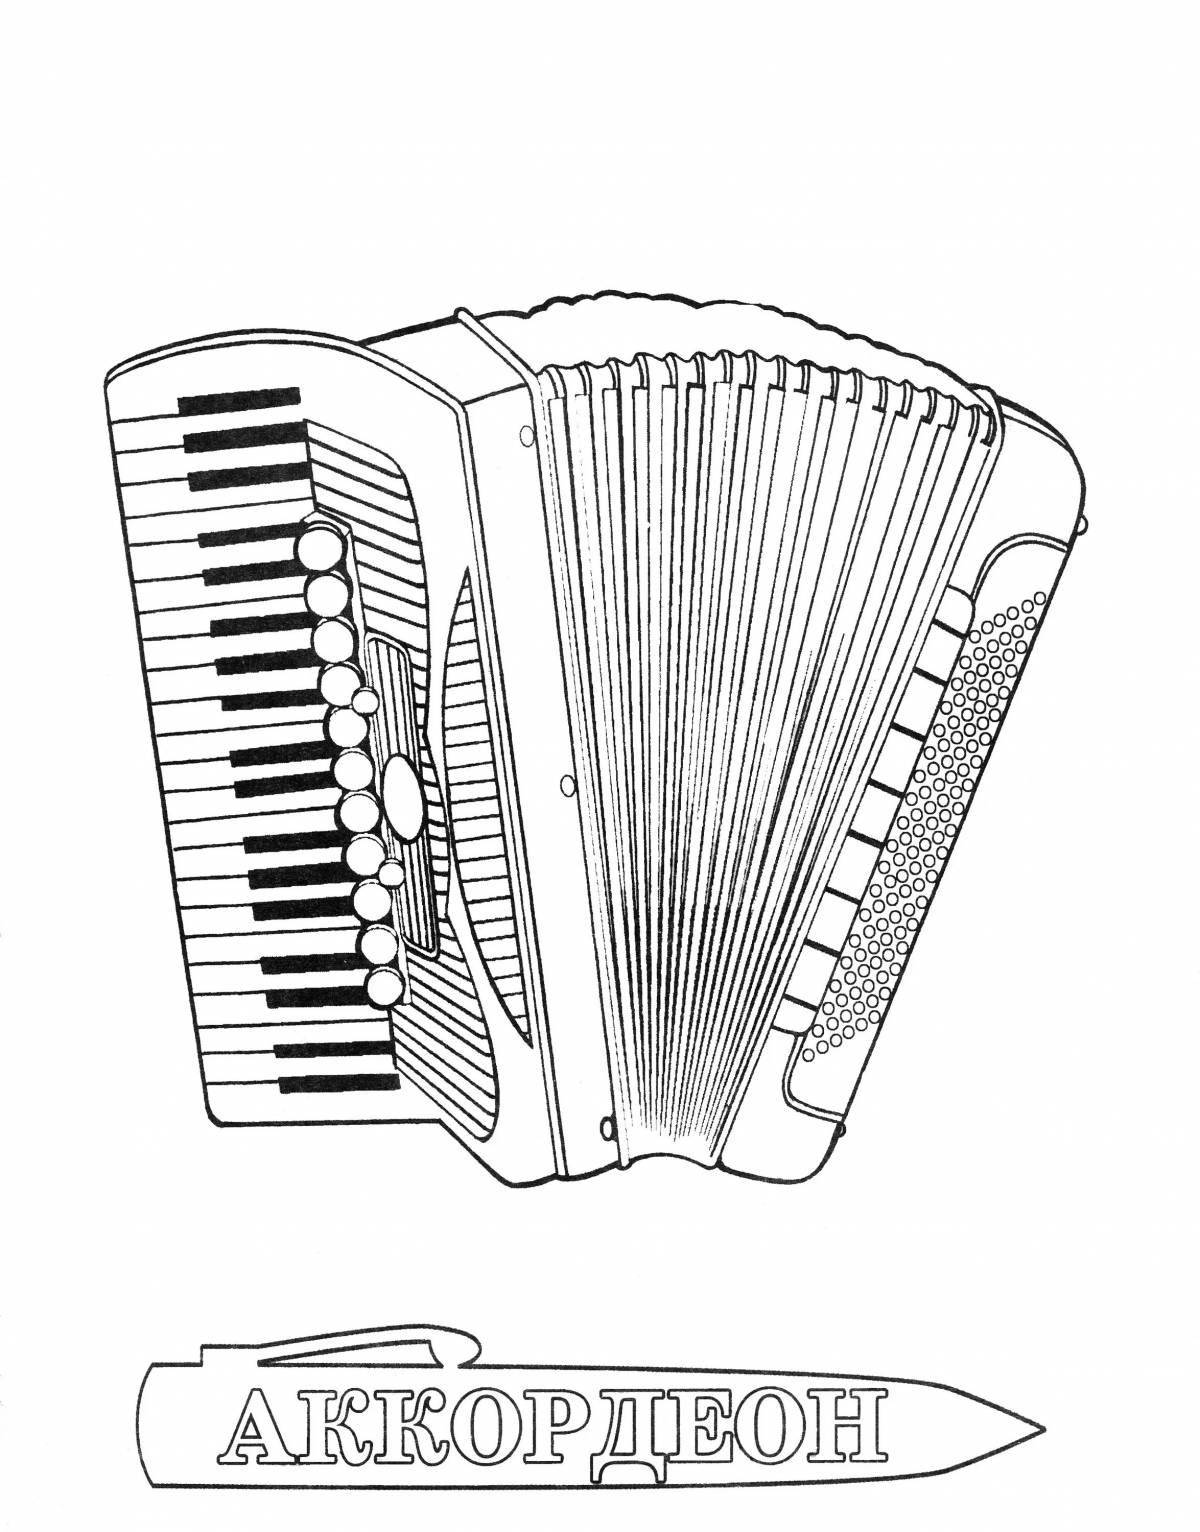 Animated coloring page for accordion for babies